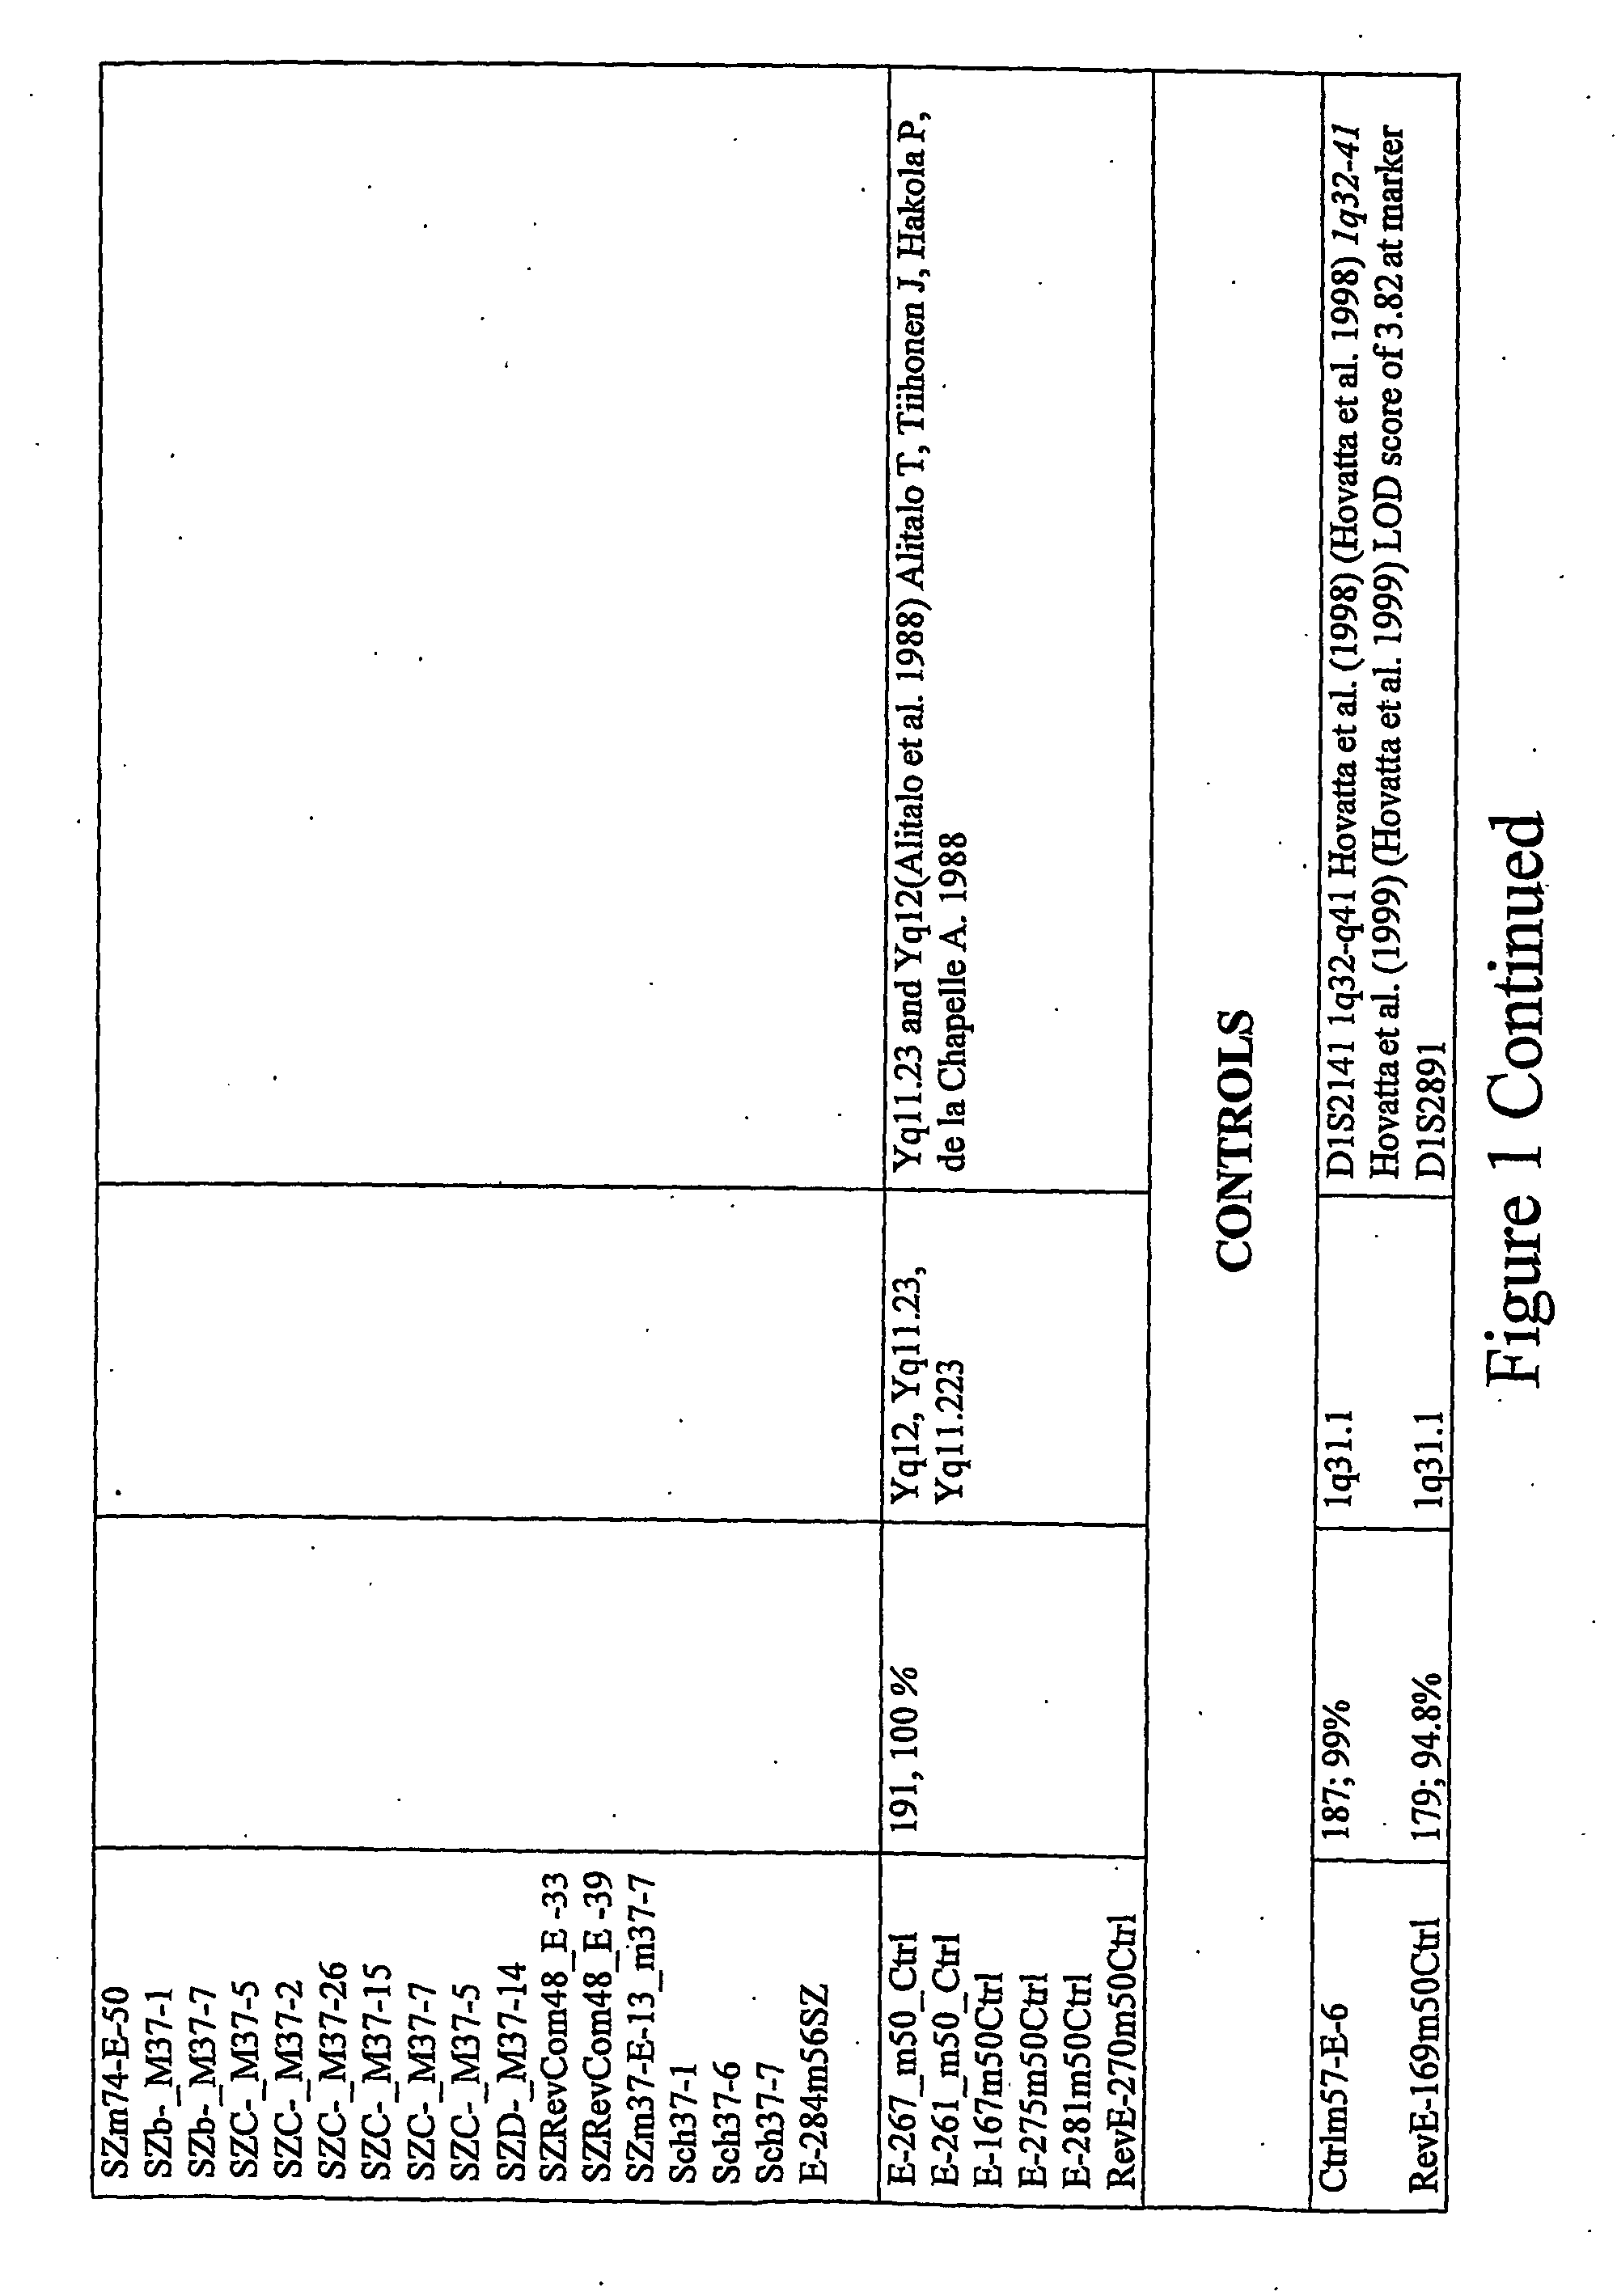 Detection of epigenetic abnormalities and diagnostic method based thereon